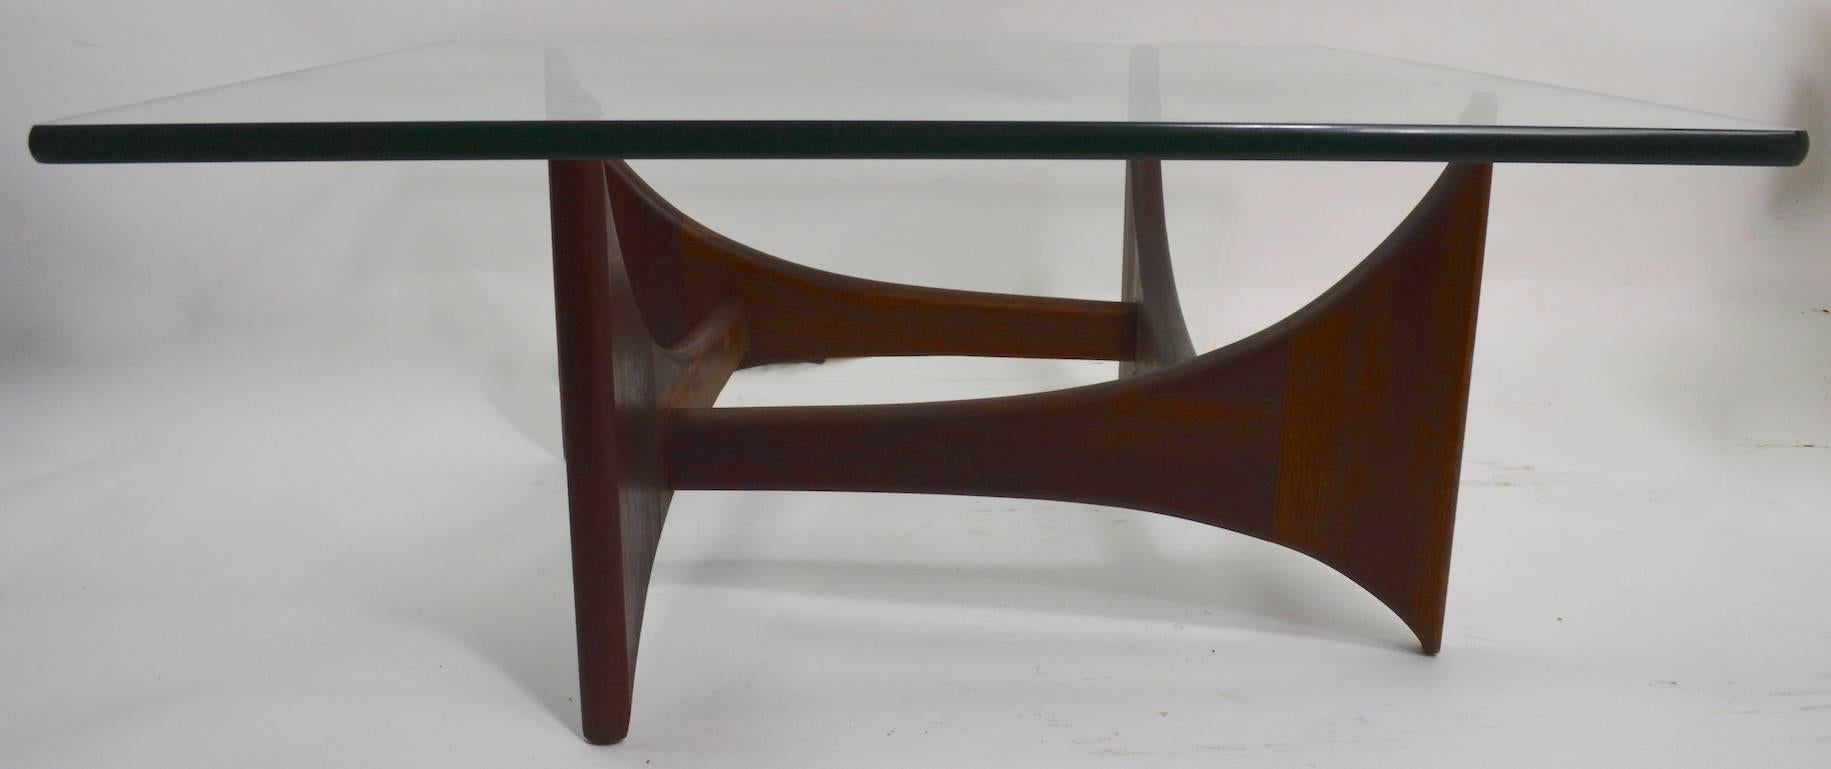 Mid-Century Modern Midcentury Coffee Table by Pearsall